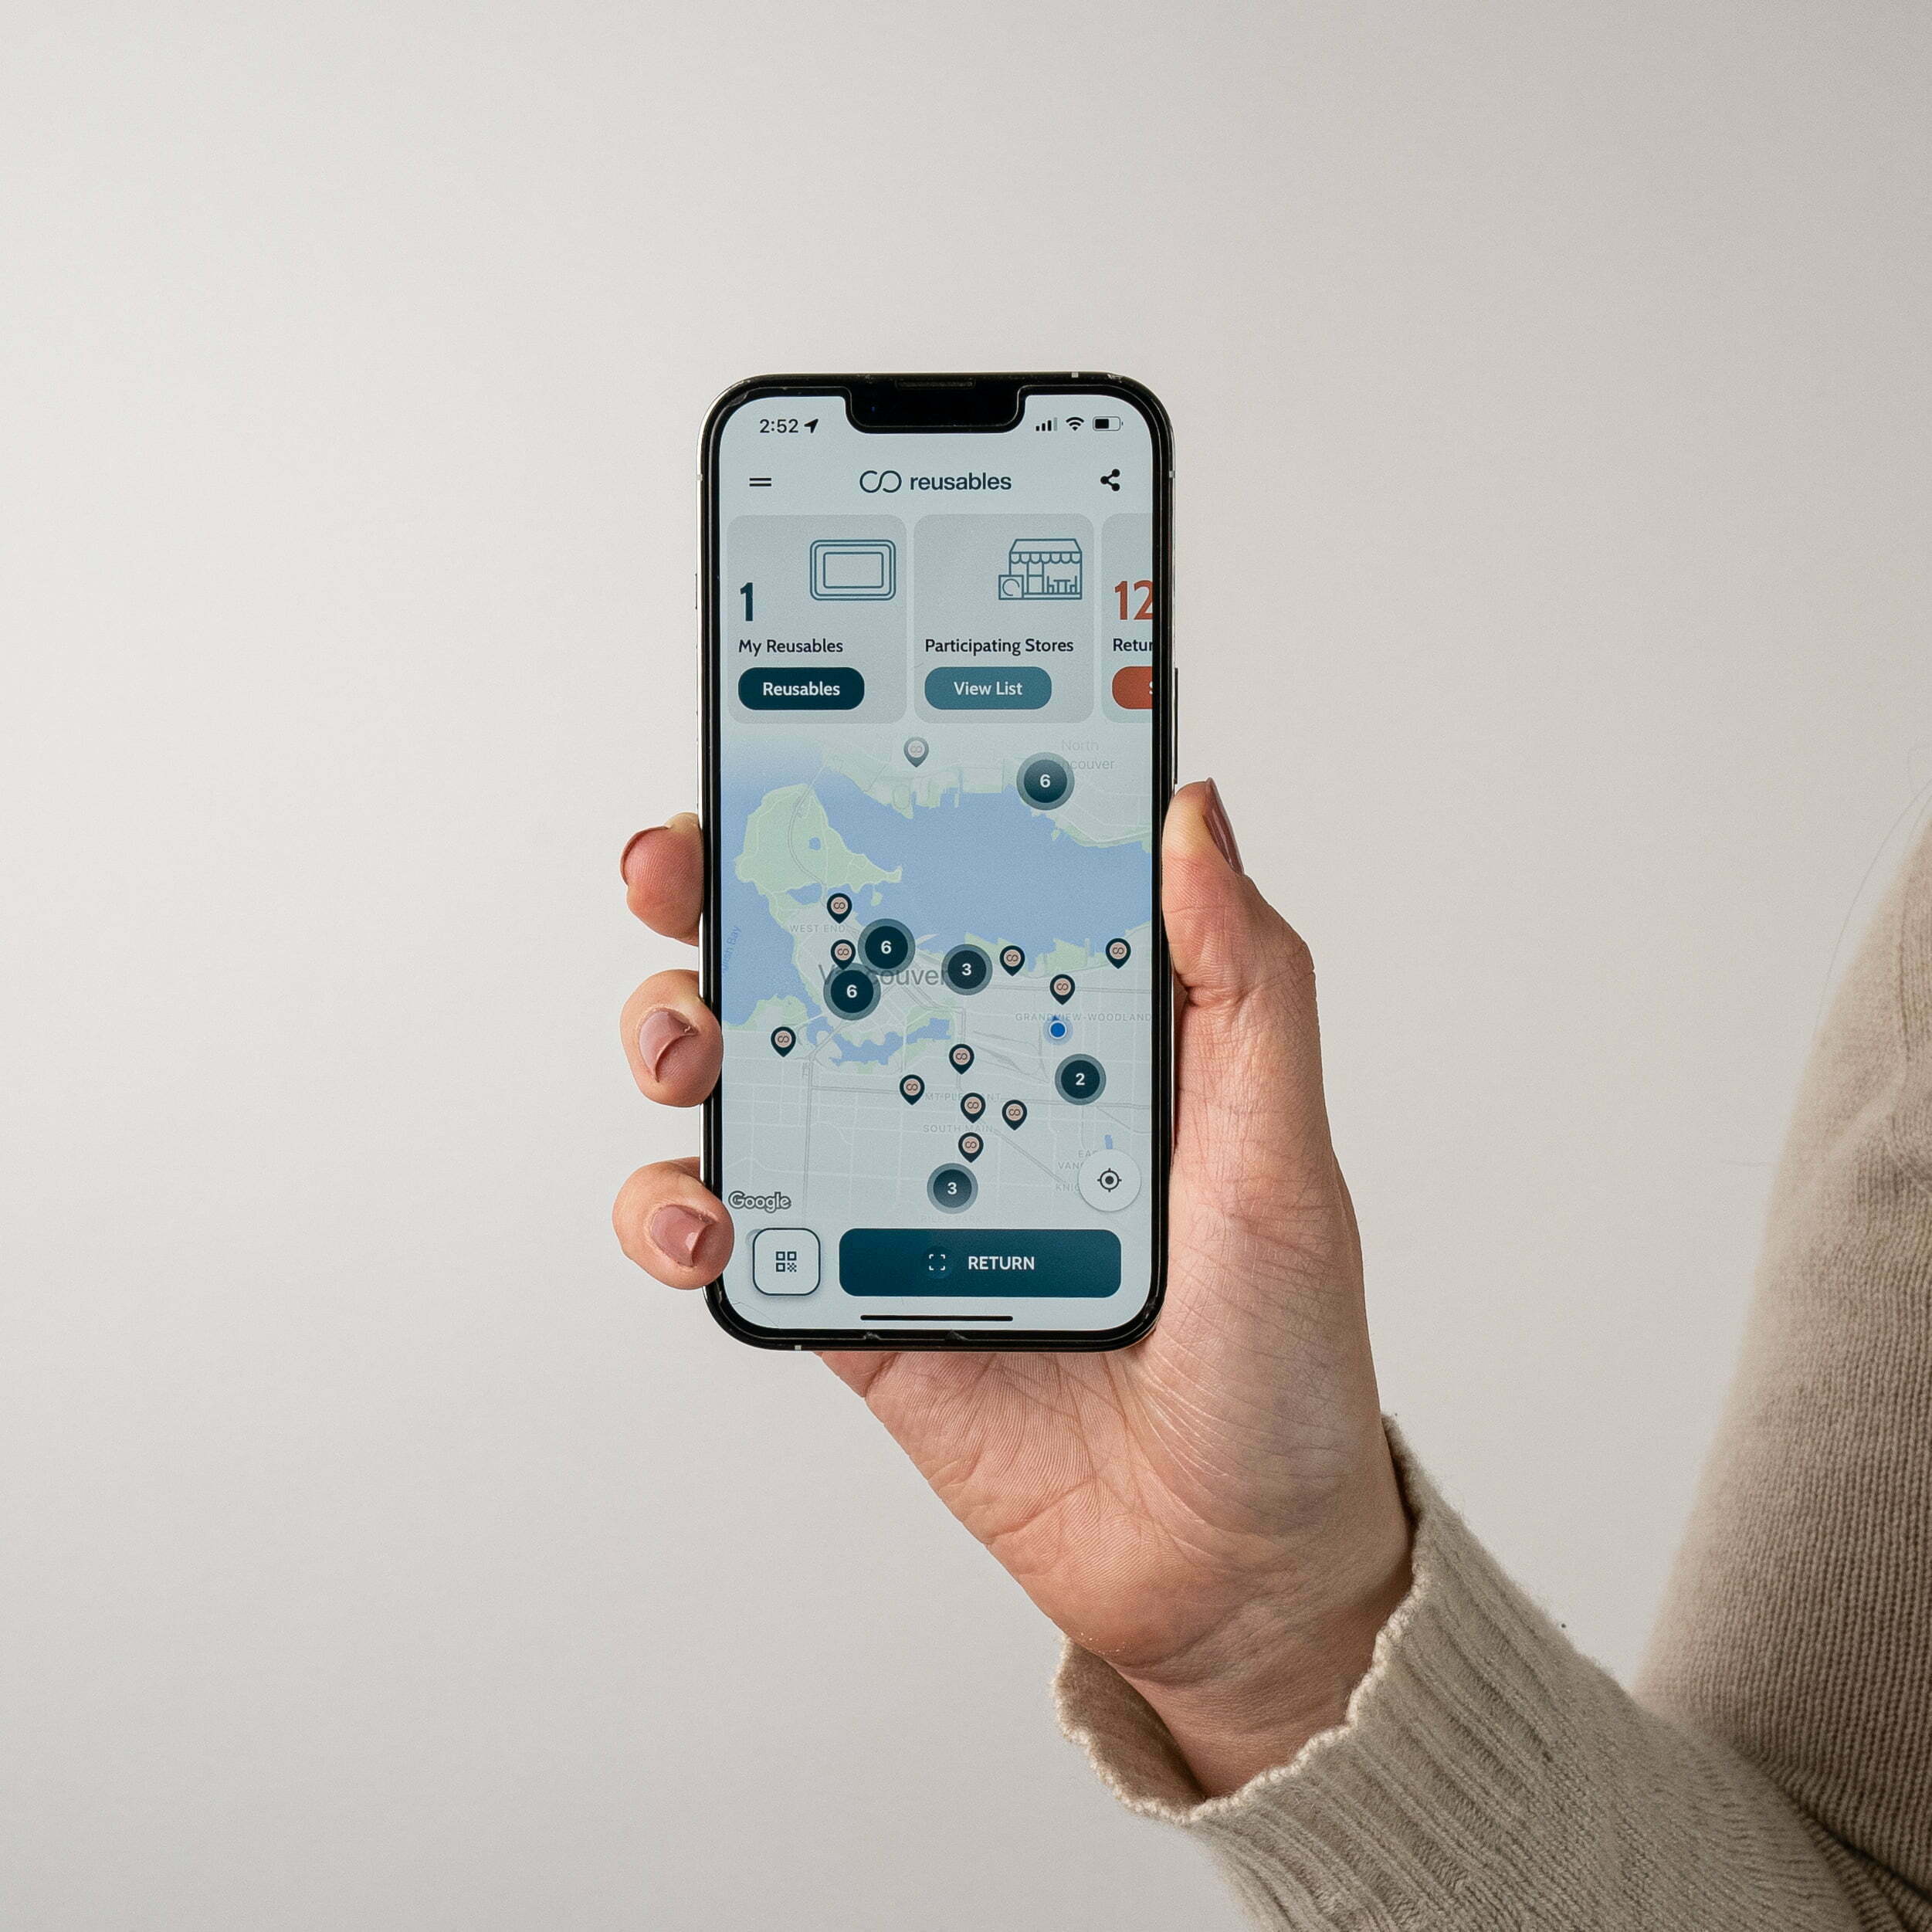 The creative shows a person's hand holding a mobile with the Reusables app open. The mobile screen shows the map of Vancouver highlighting Reusers and participating stores.